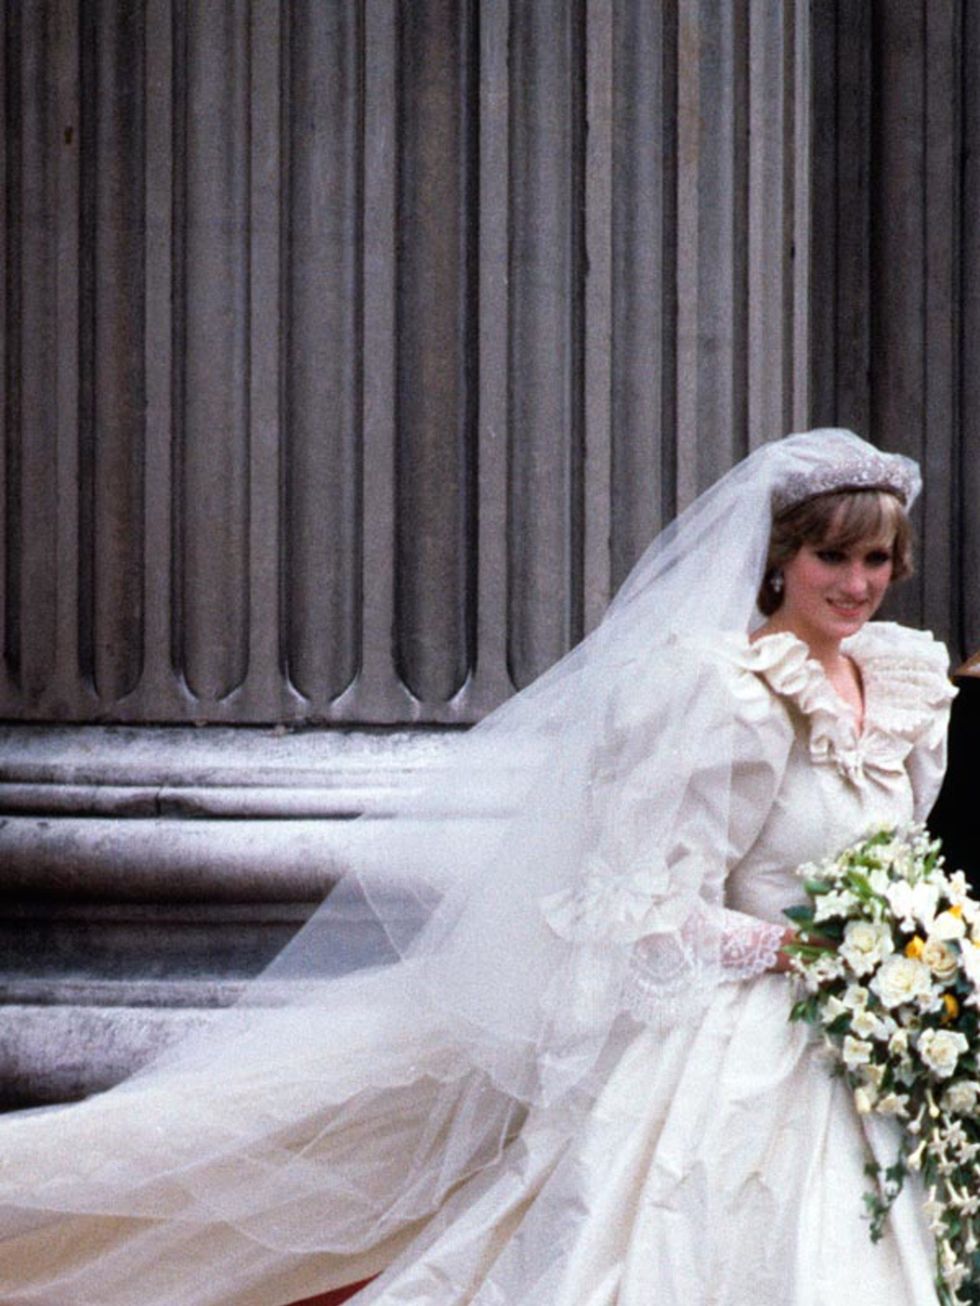 Lady Diana Spencer and Prince Charles